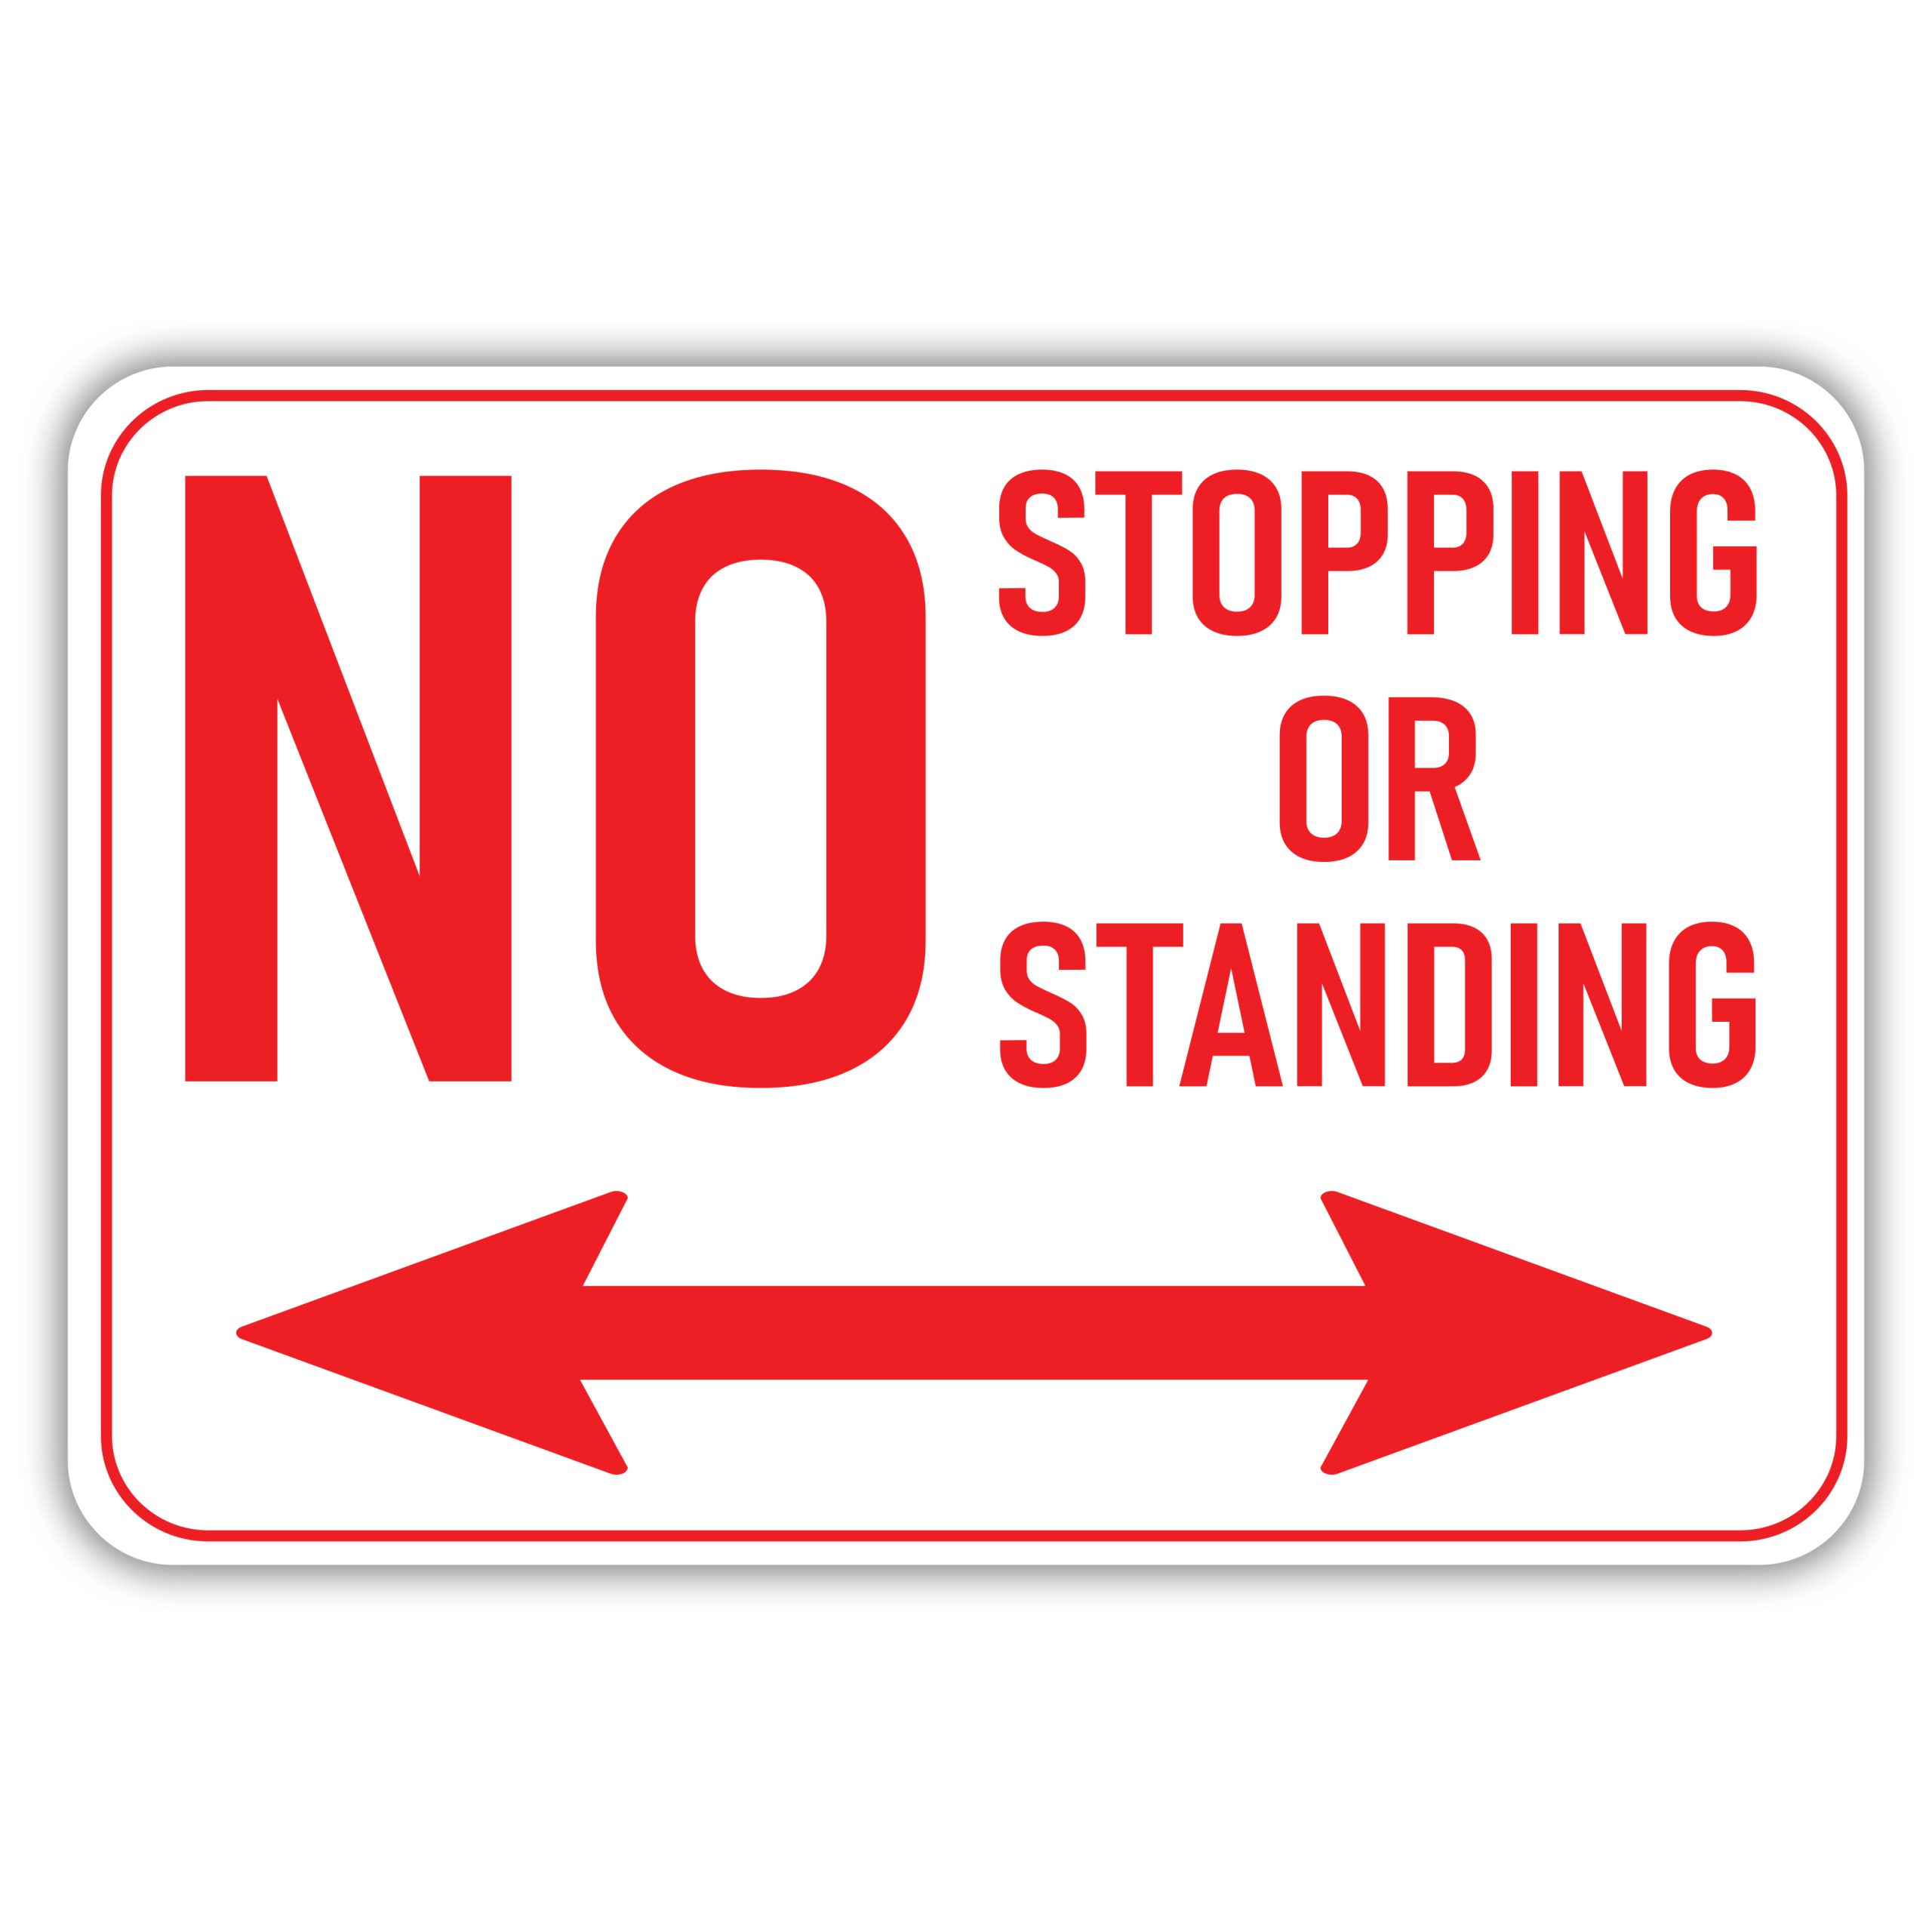 When Can You Stop At A No Stopping Sign